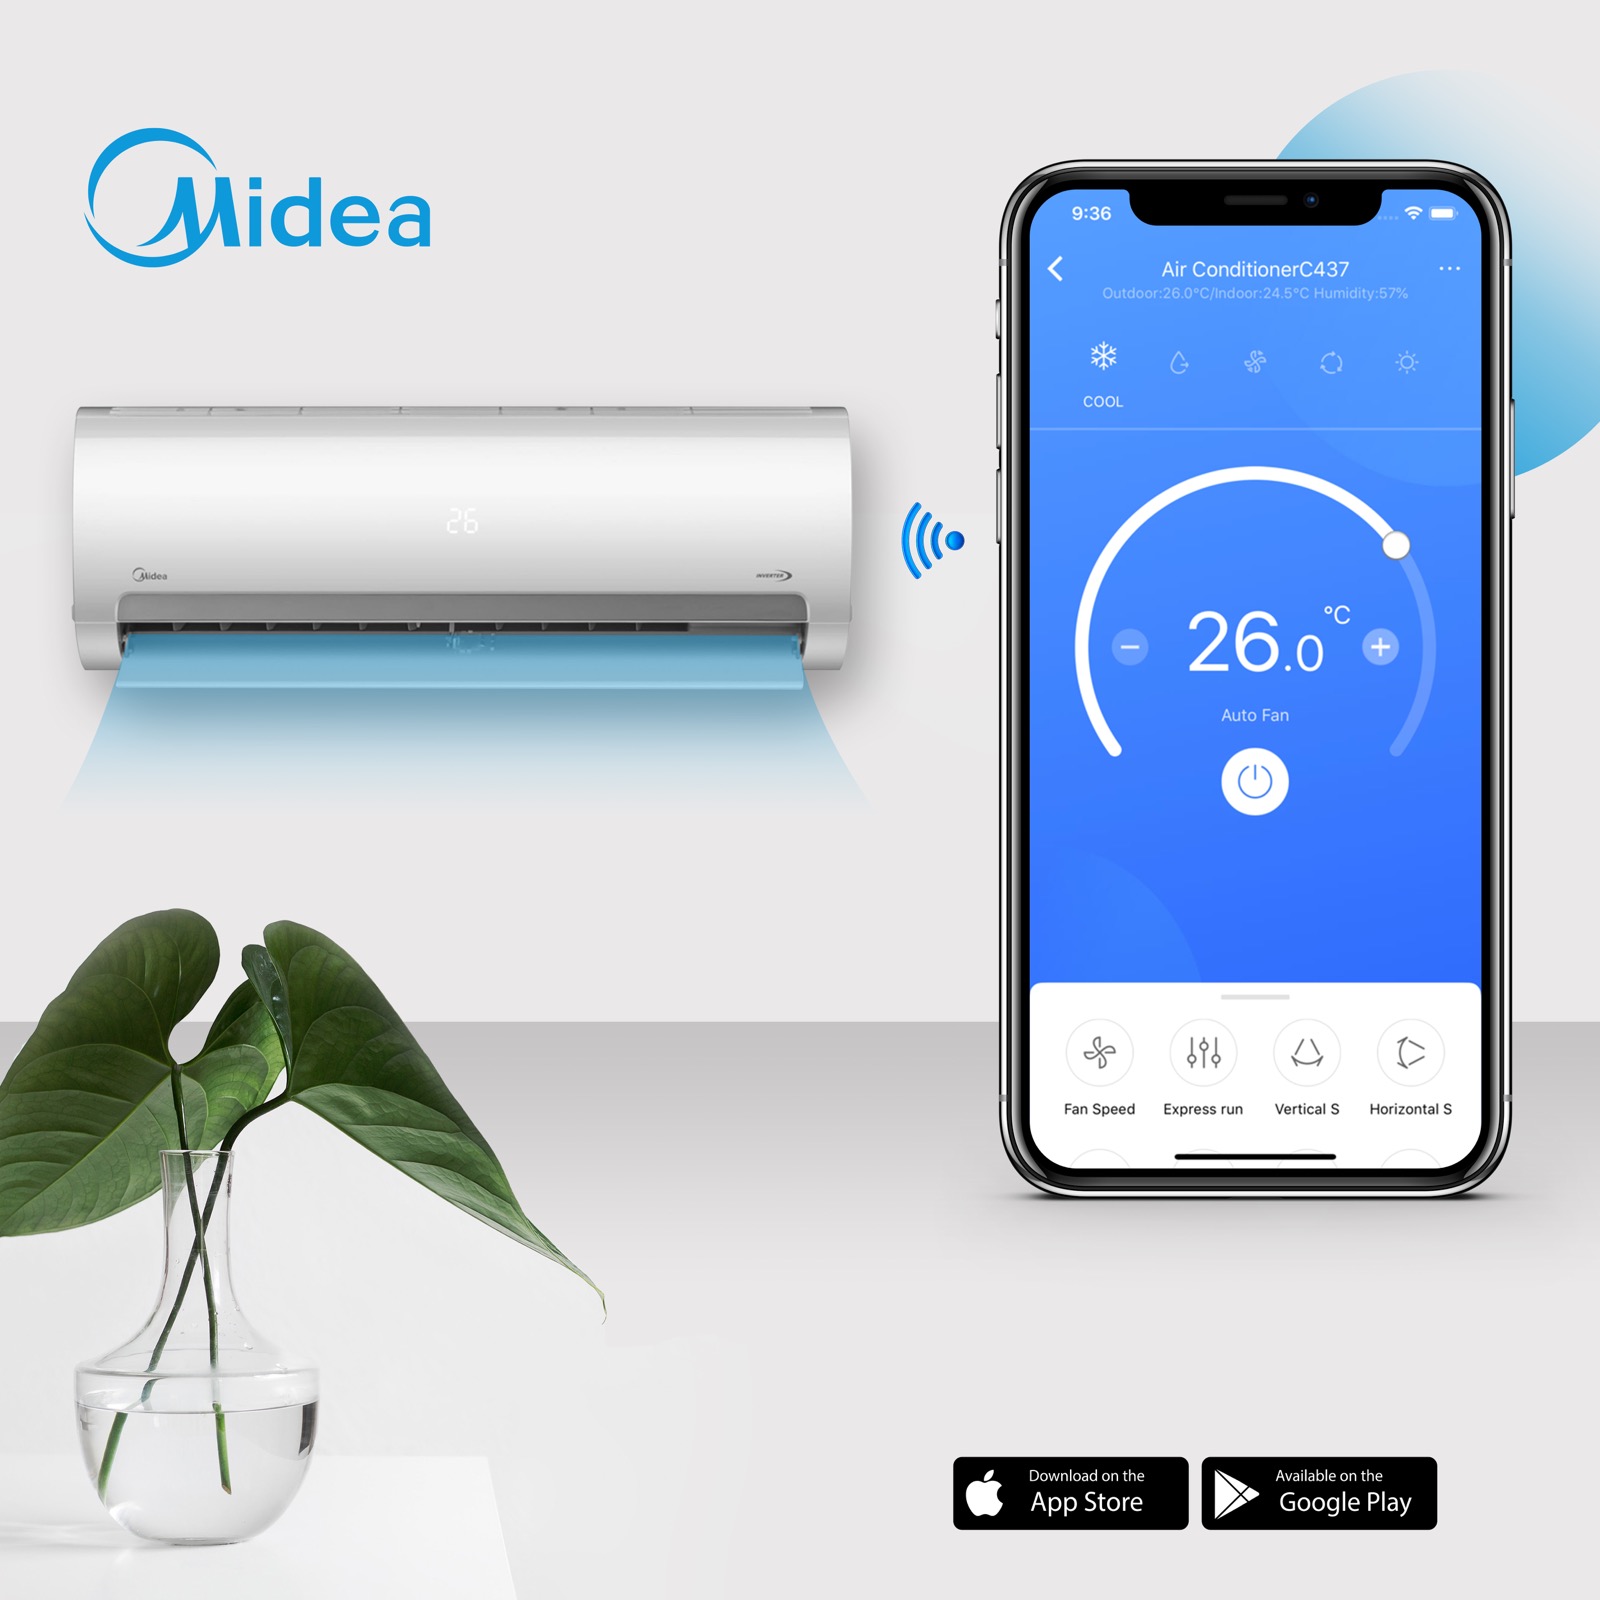 Midea air conditioners in Malta can be fully operated using the Midea Air App